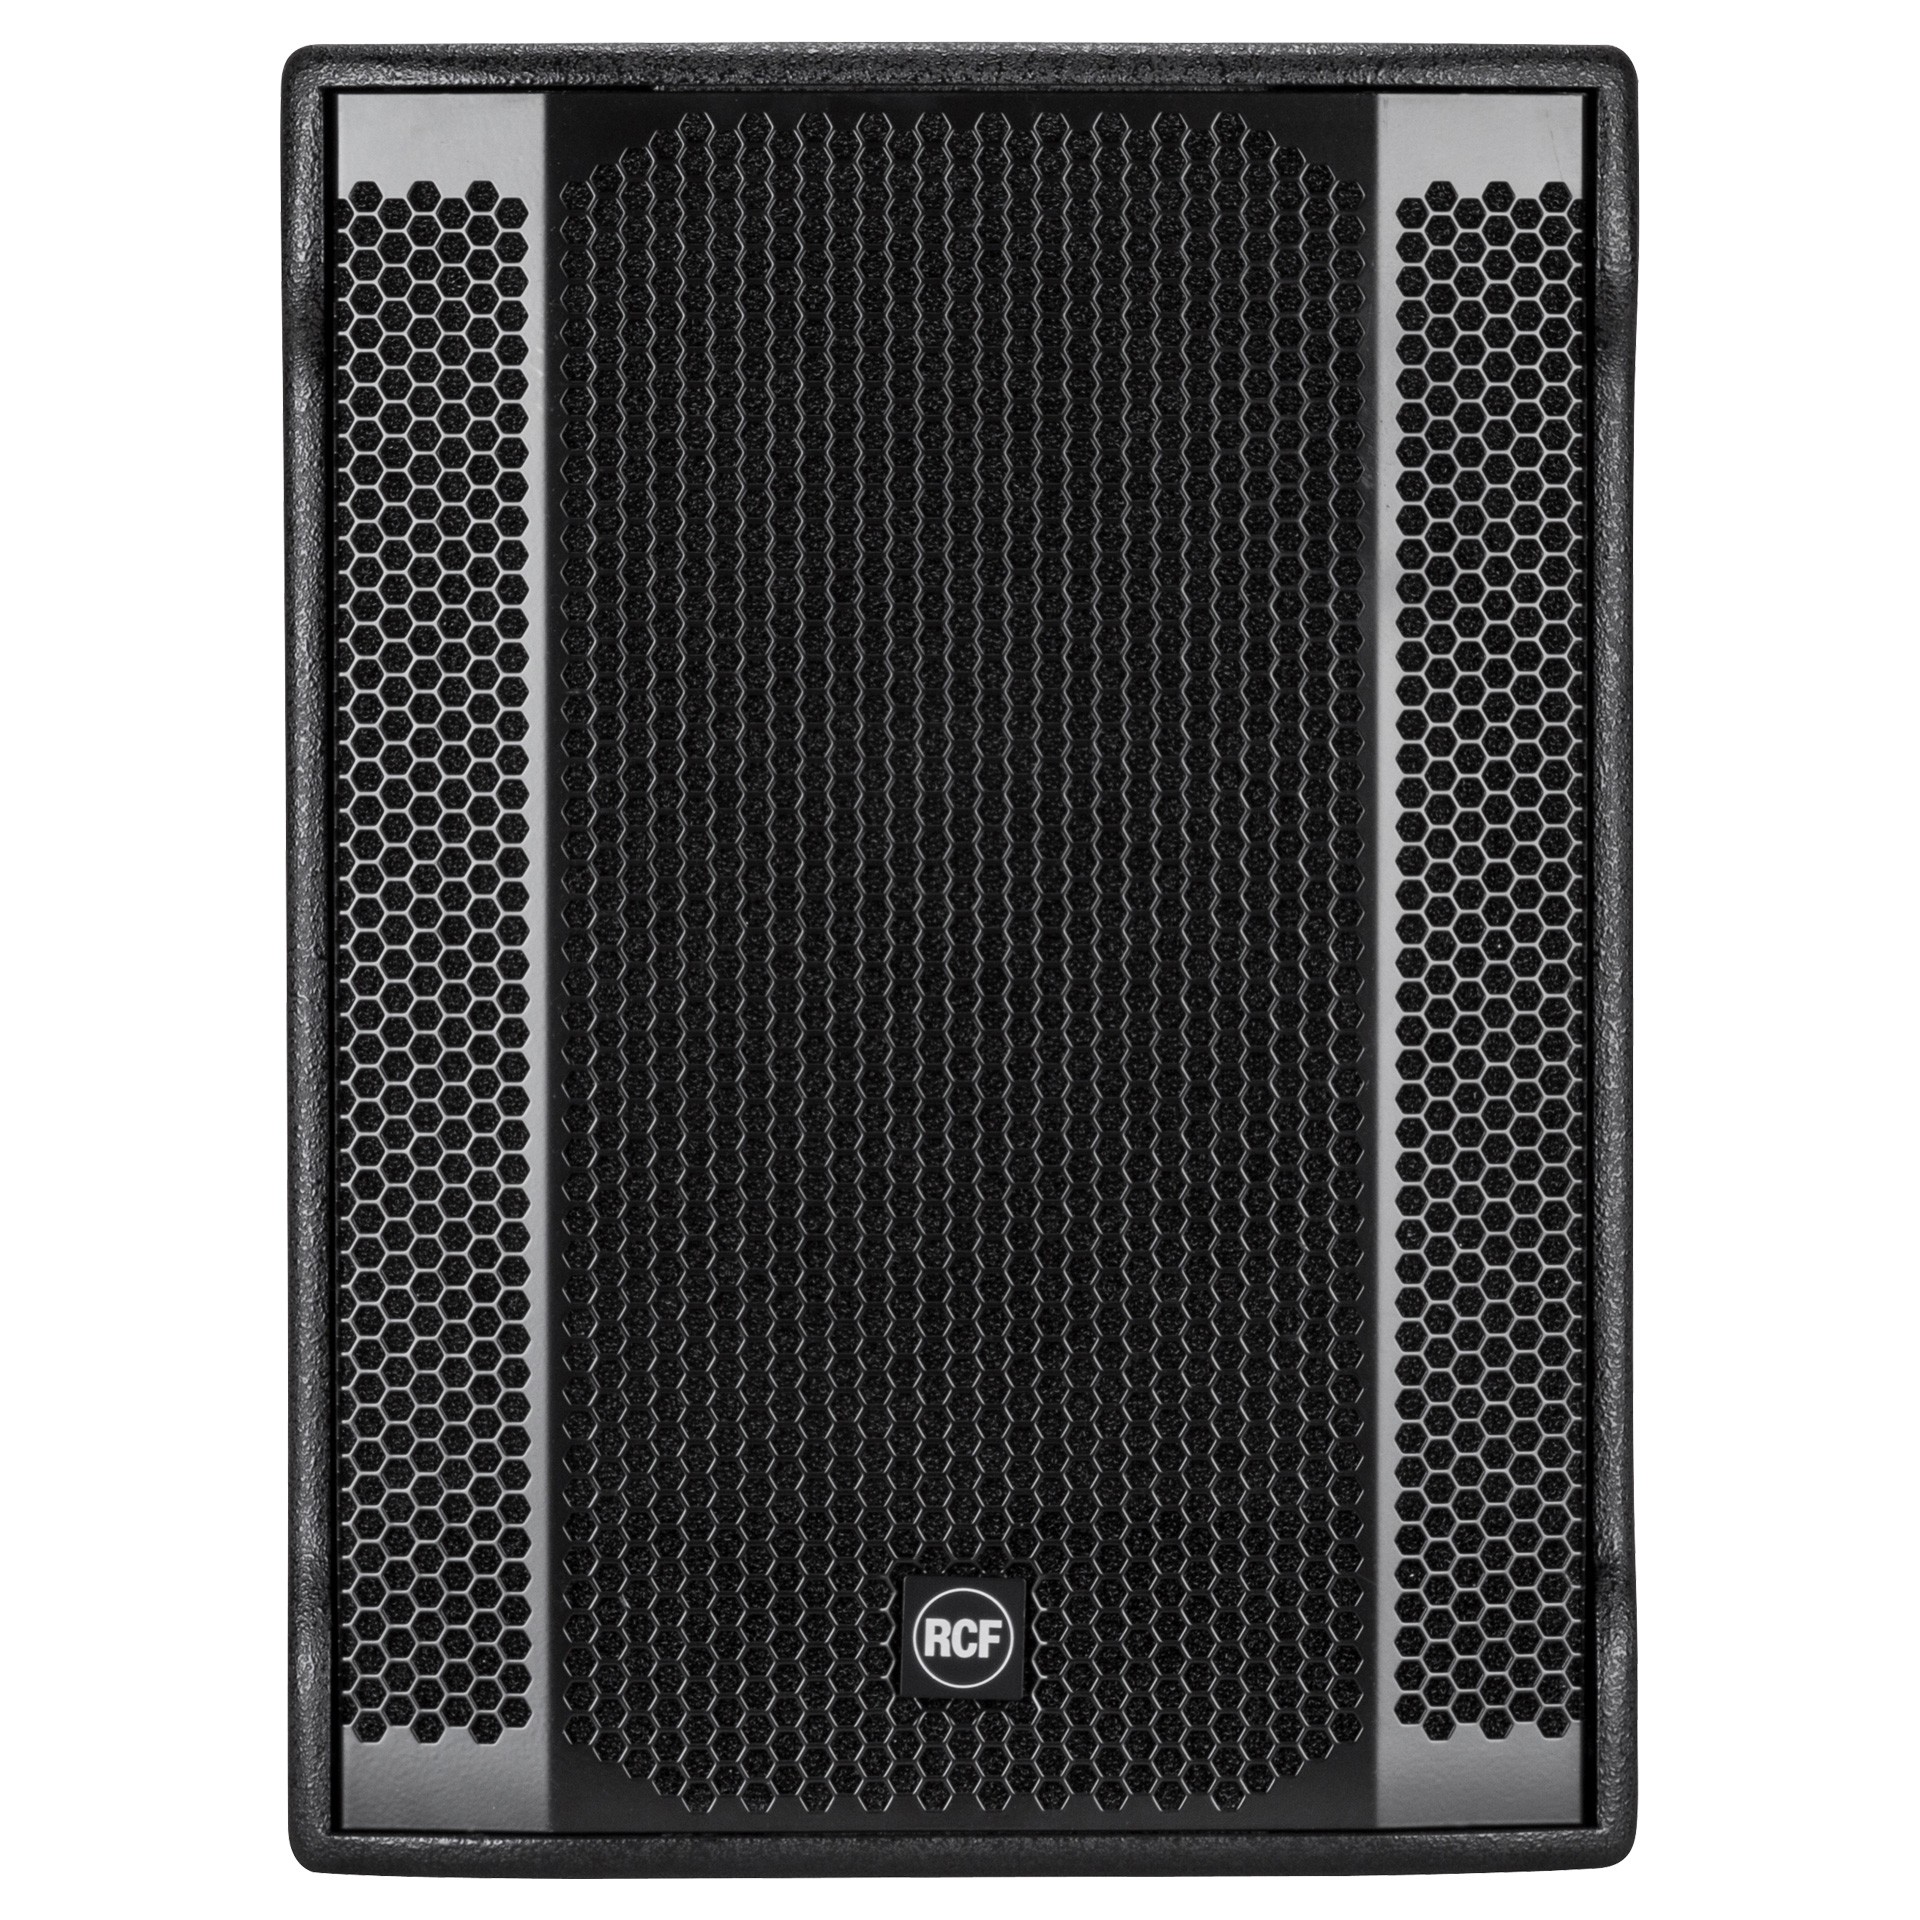 Subwoofere pro - Subwoofer activ RCF SUB 905-AS II, audioclub.ro